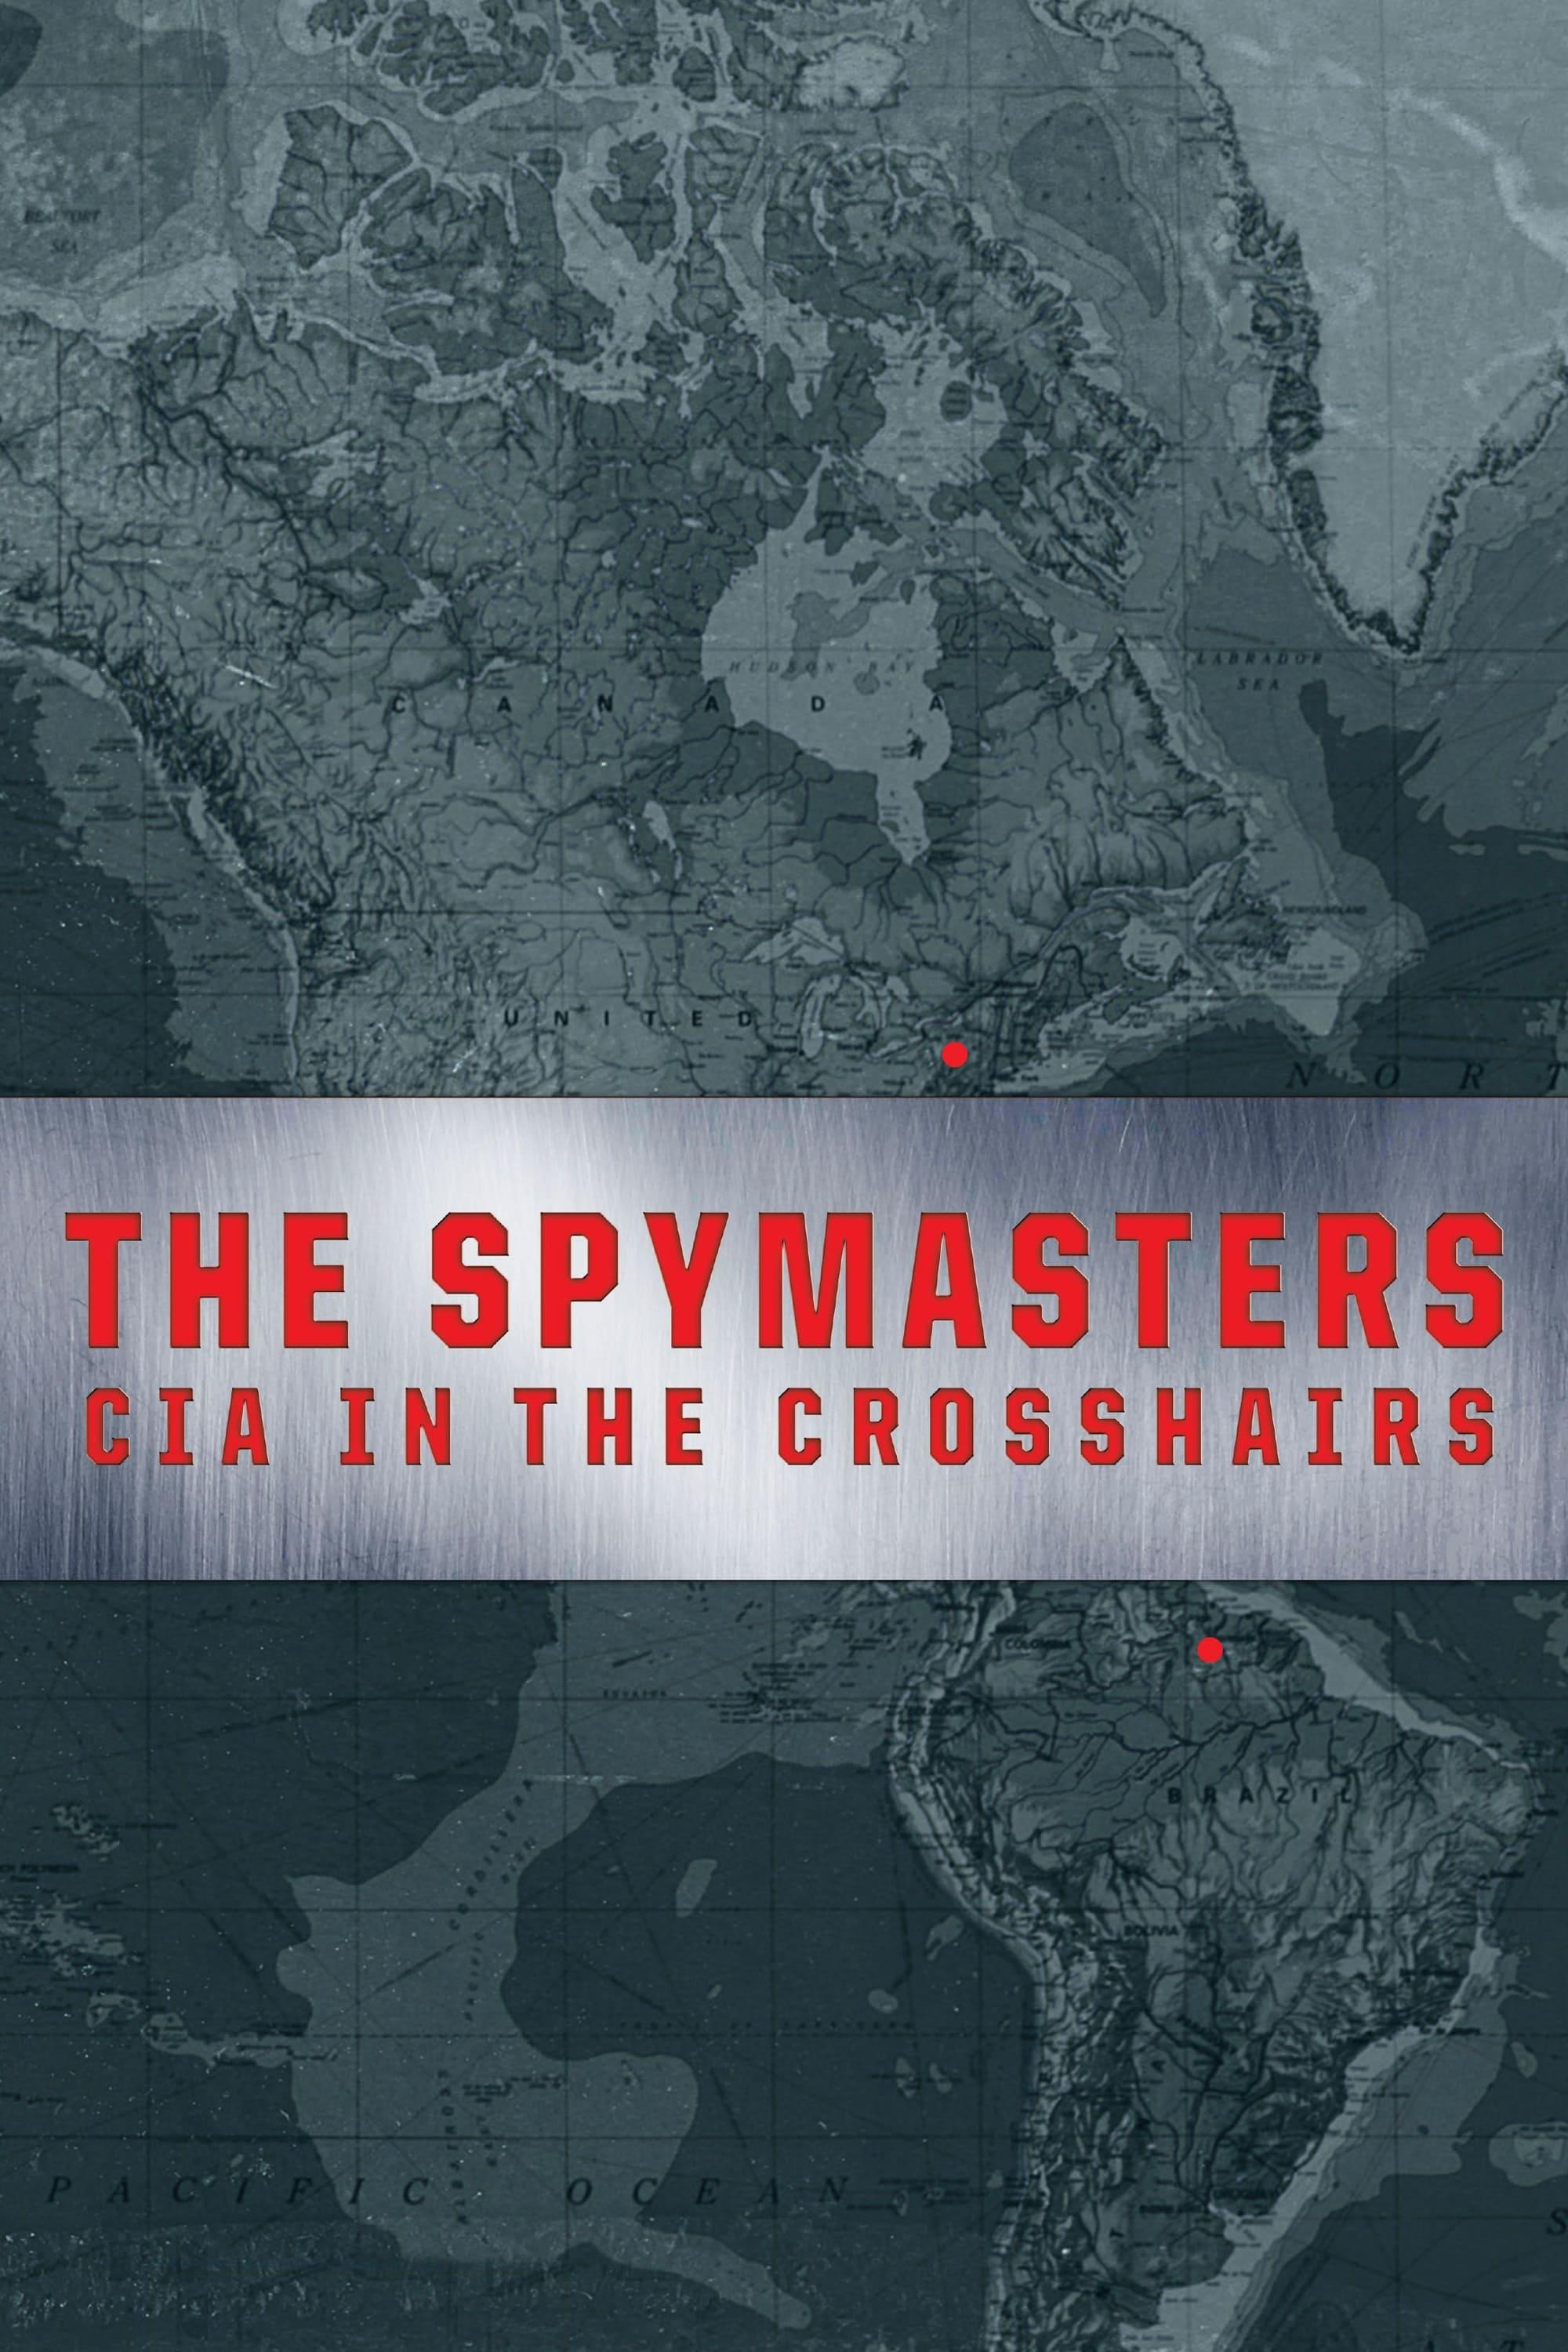 The Spymasters: CIA in the Crosshairs poster